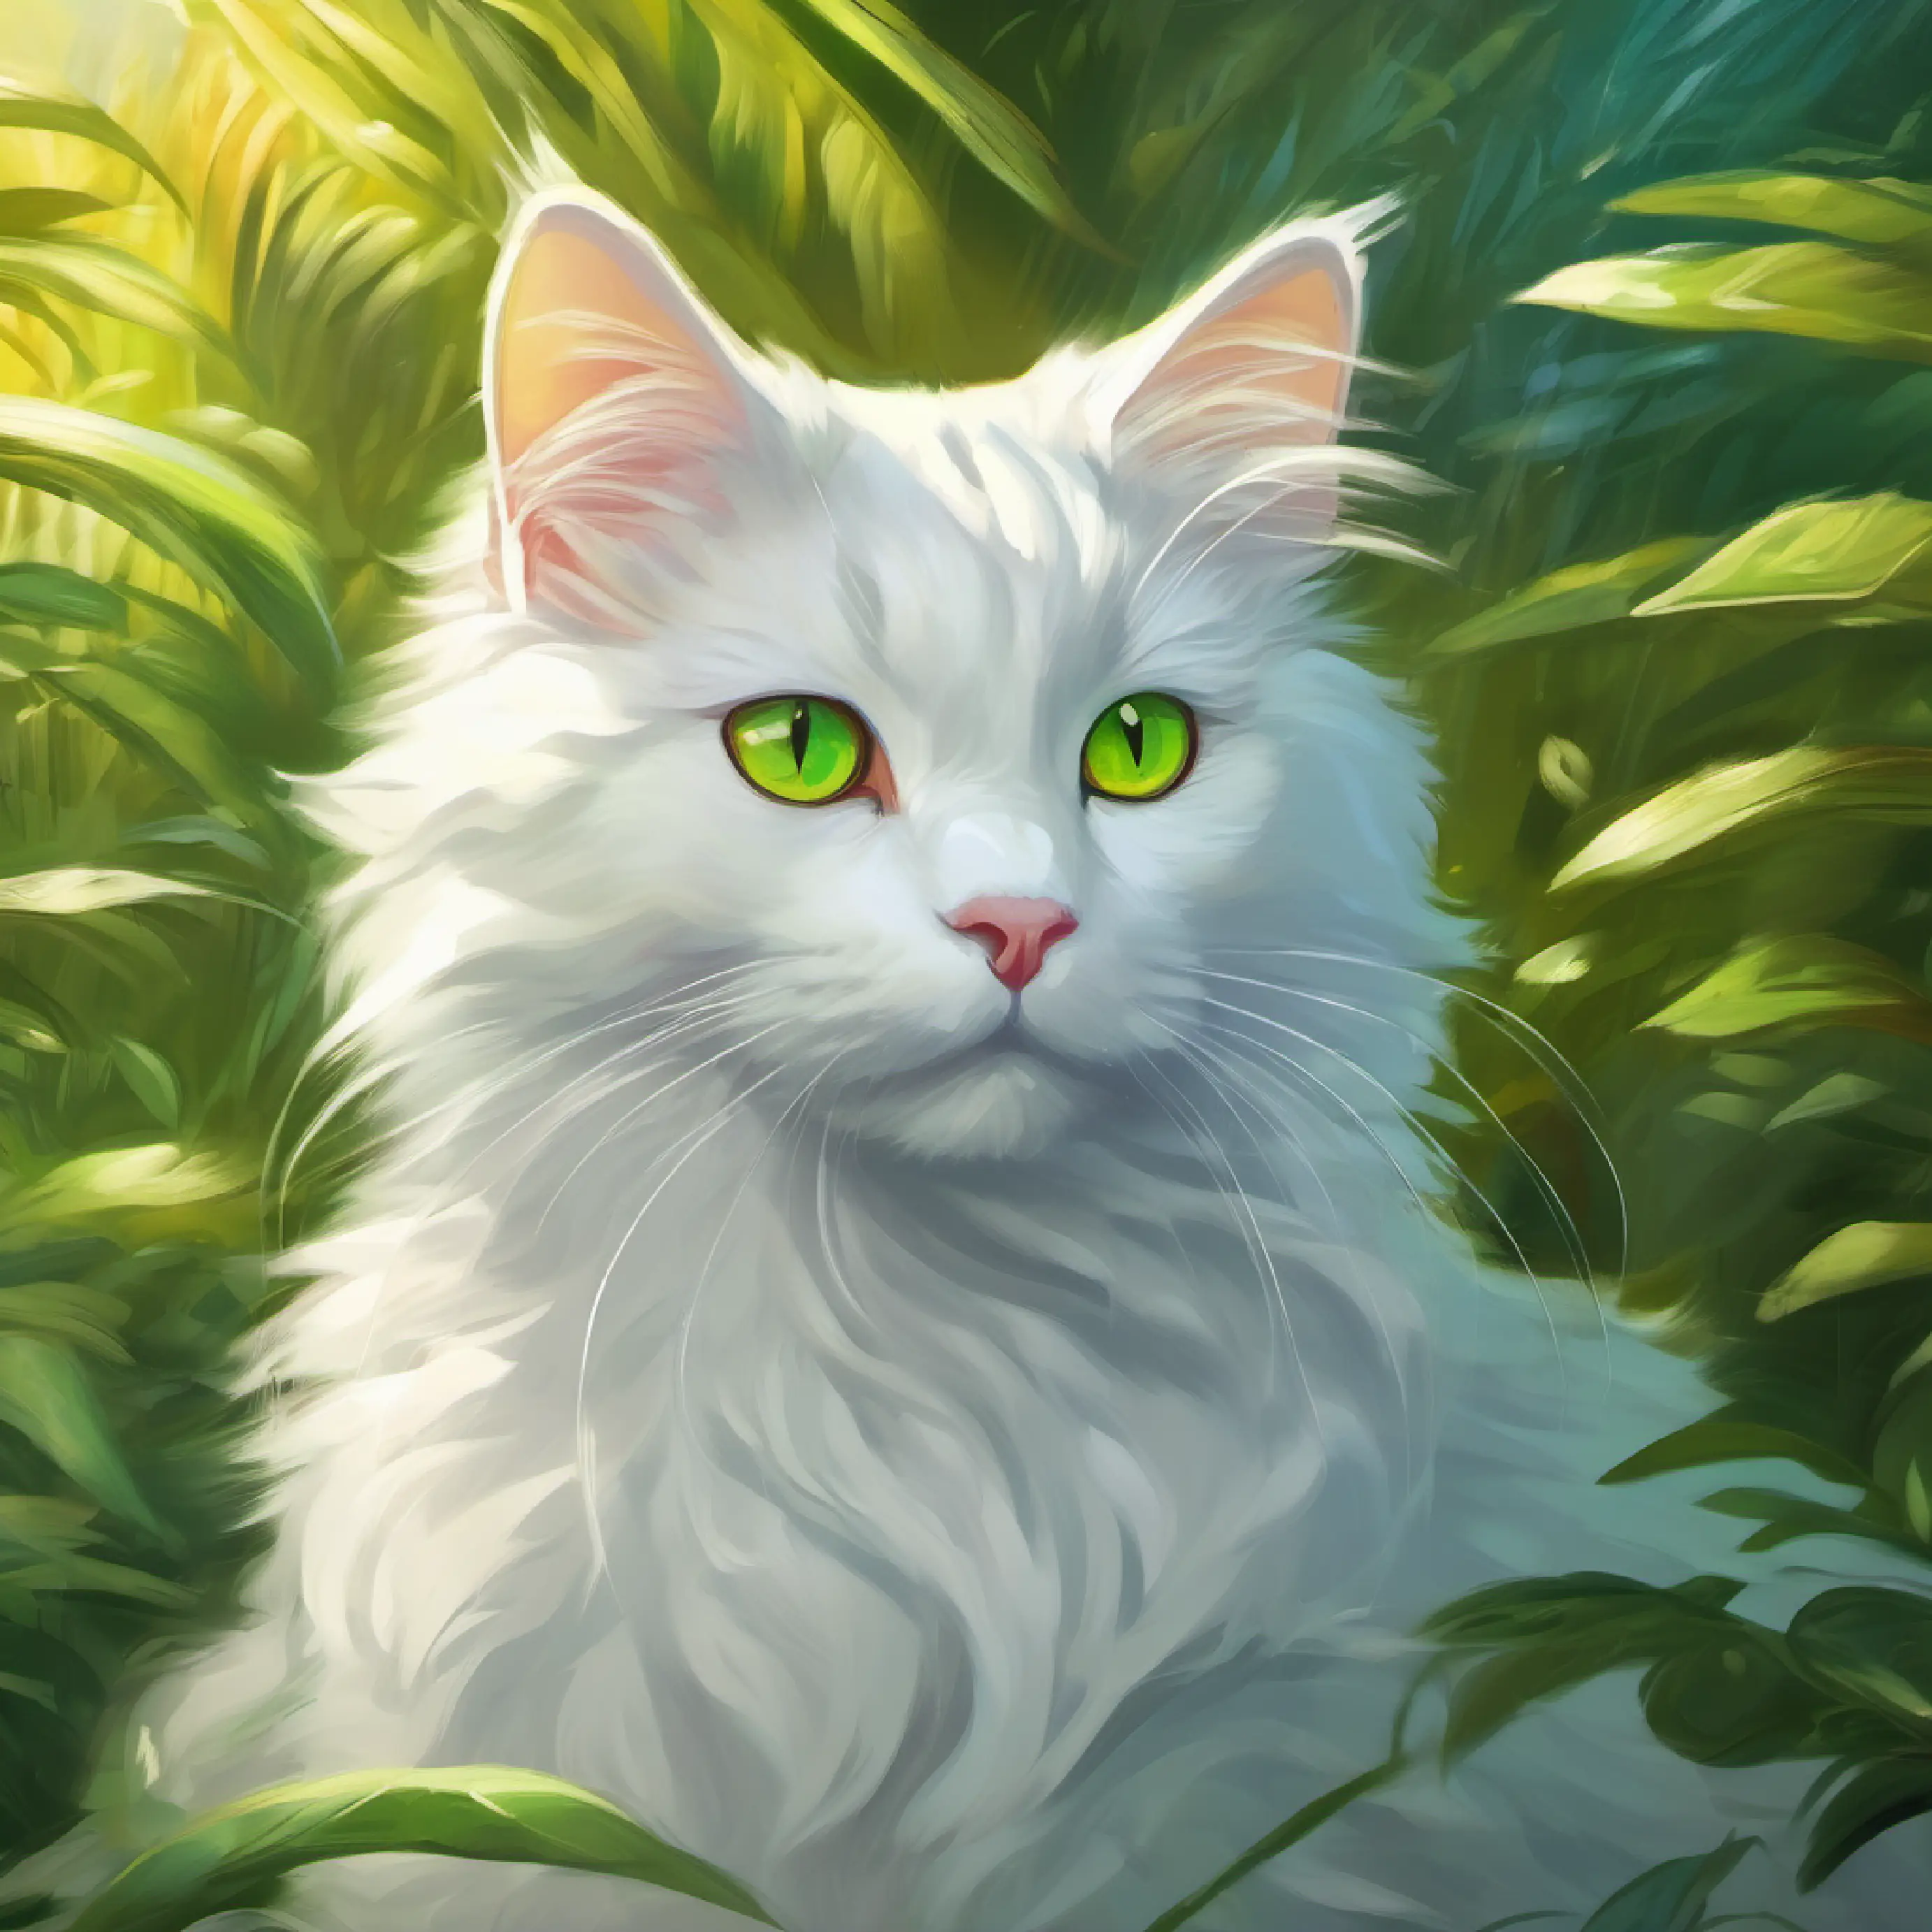 Fluffy white cat with yellow-green eyes, adventurous reflects on his day and looks forward to tomorrow.